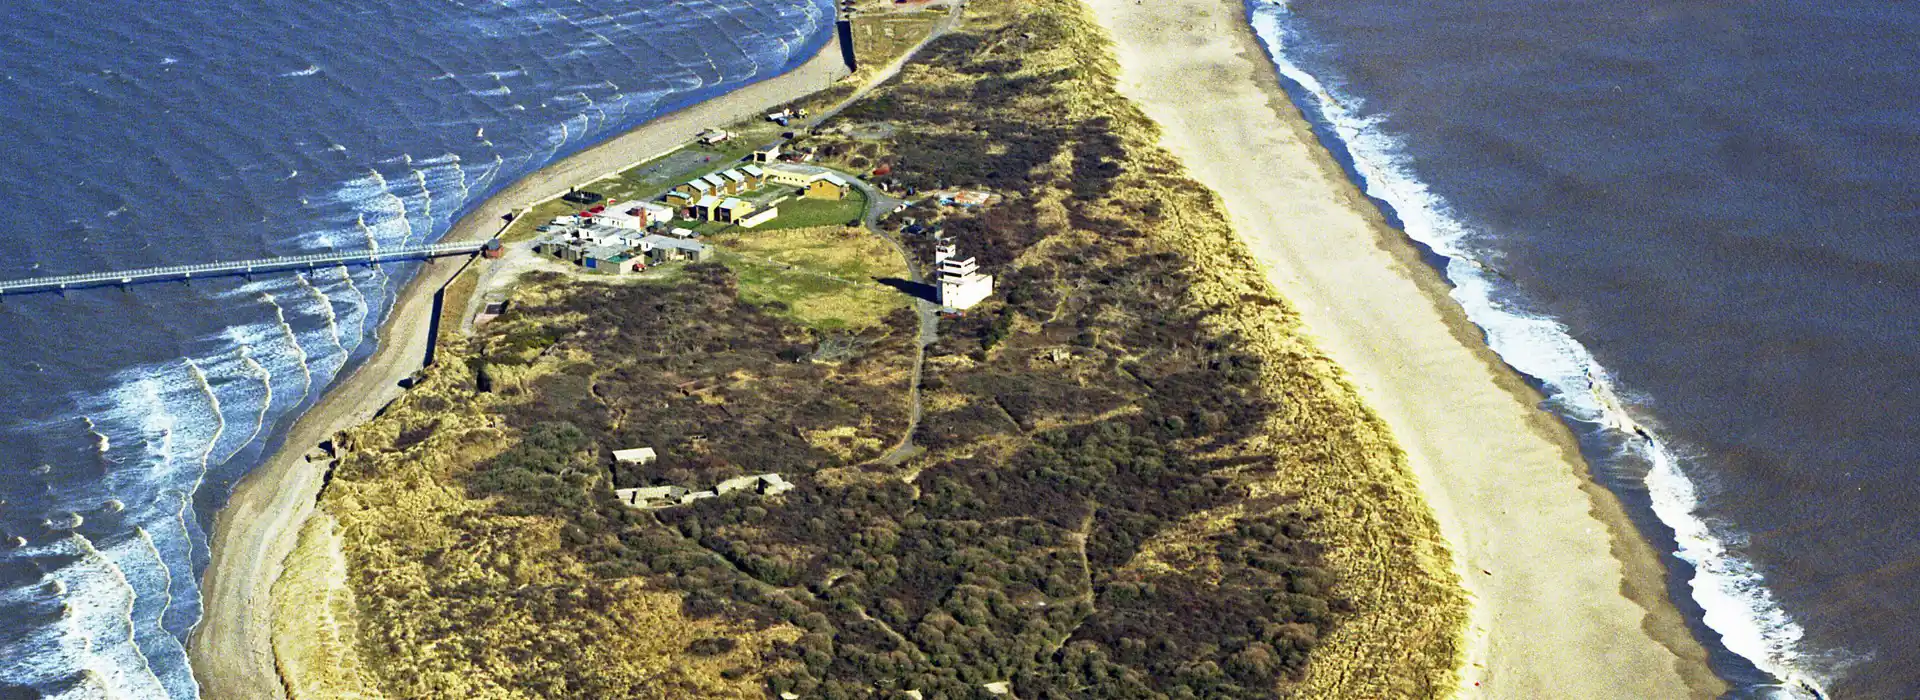 Spurn Head, East Riding of Yorkshire